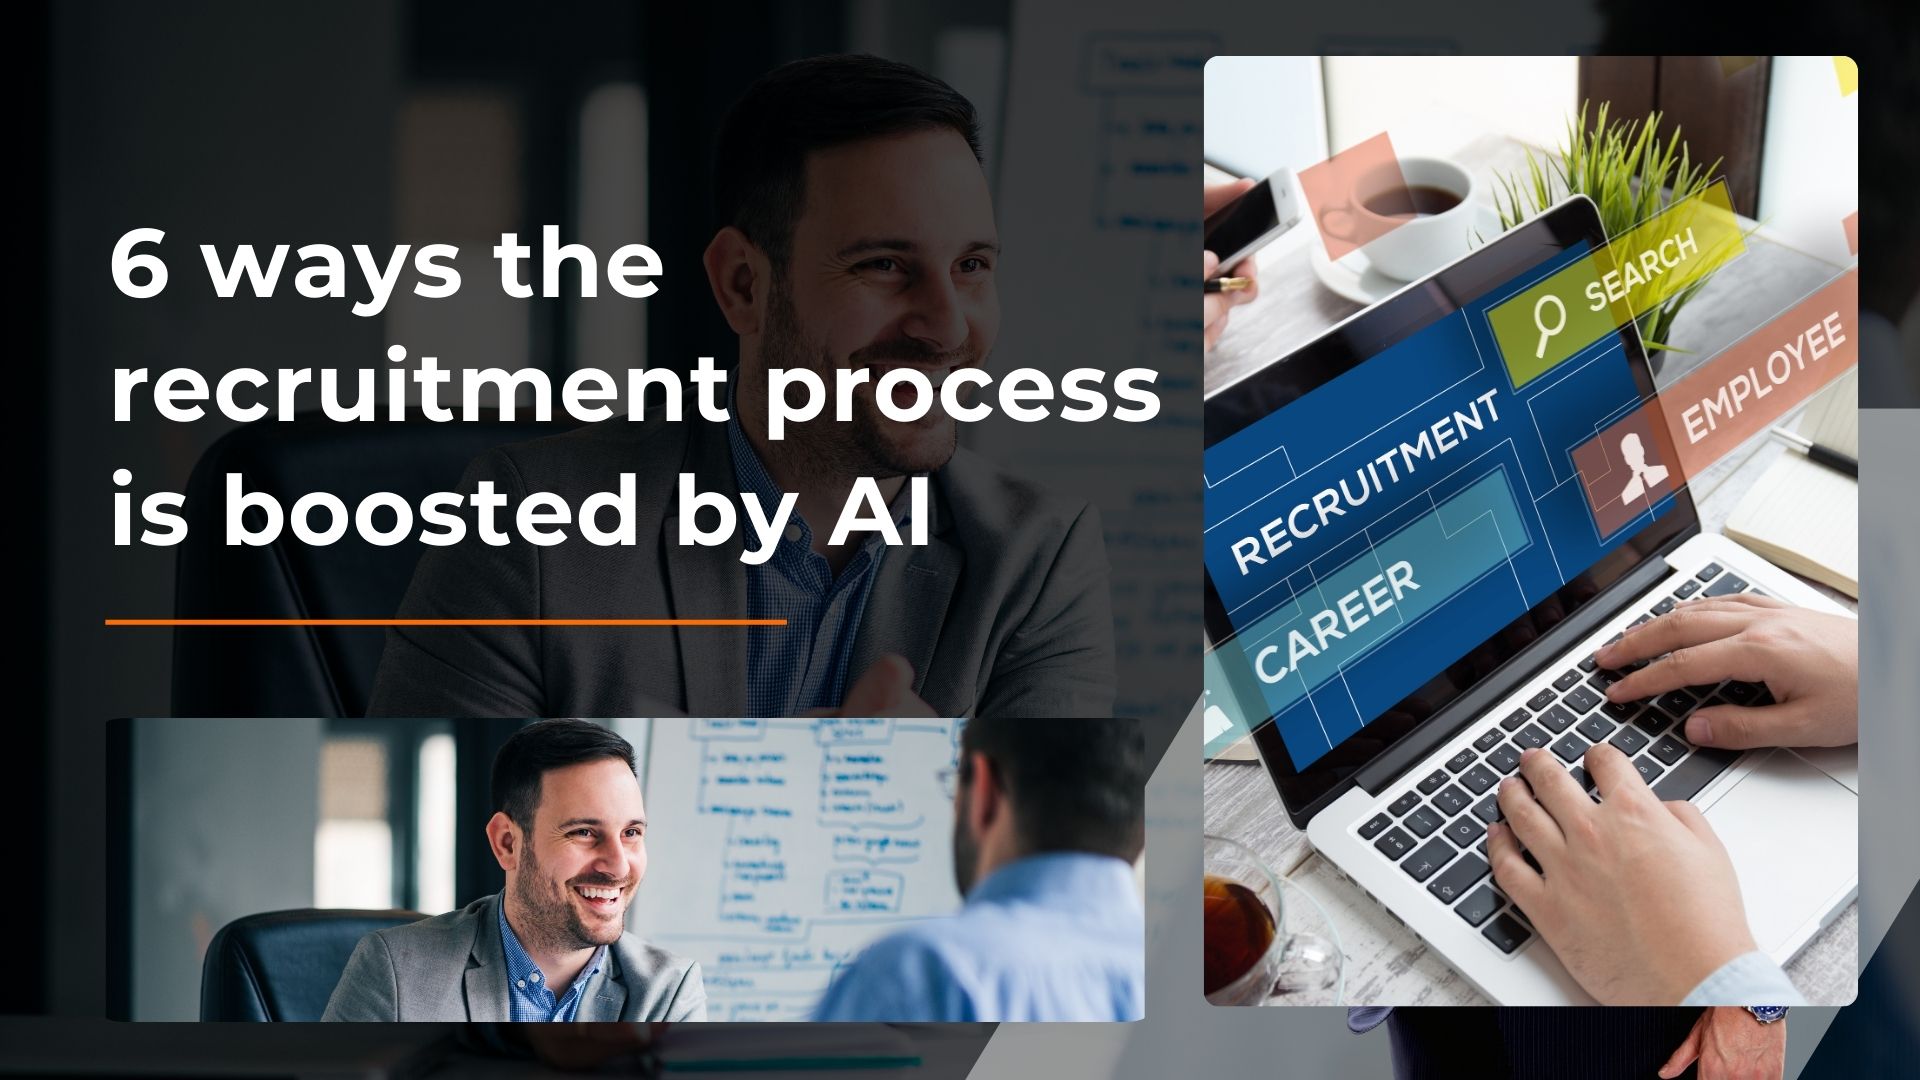 6 Ways the Recruitment Process is Boosted by AI